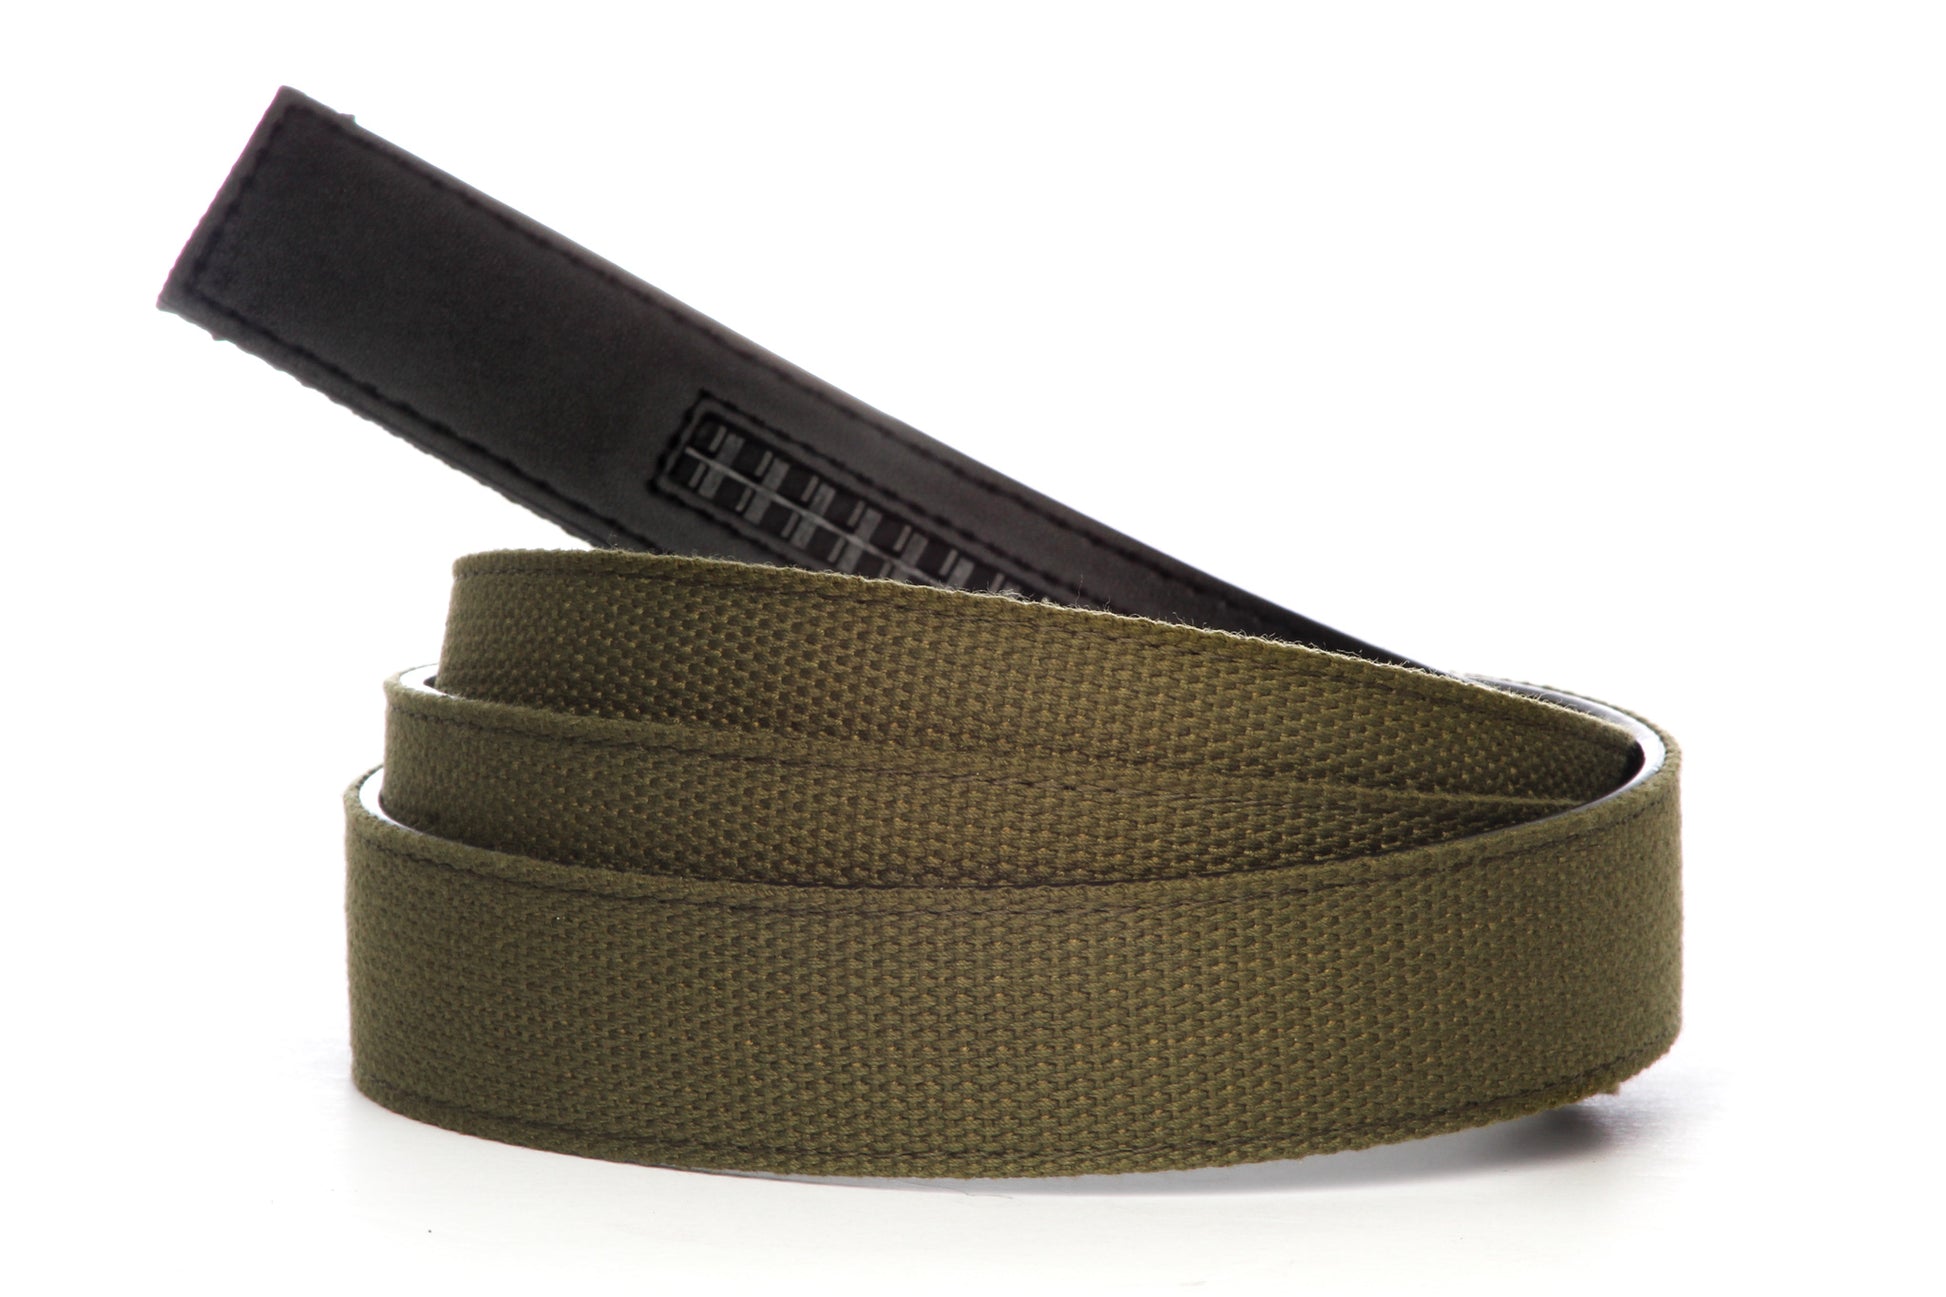 Men's canvas belt strap in olive drab with a 1.25-inch width, casual look, microfiber back